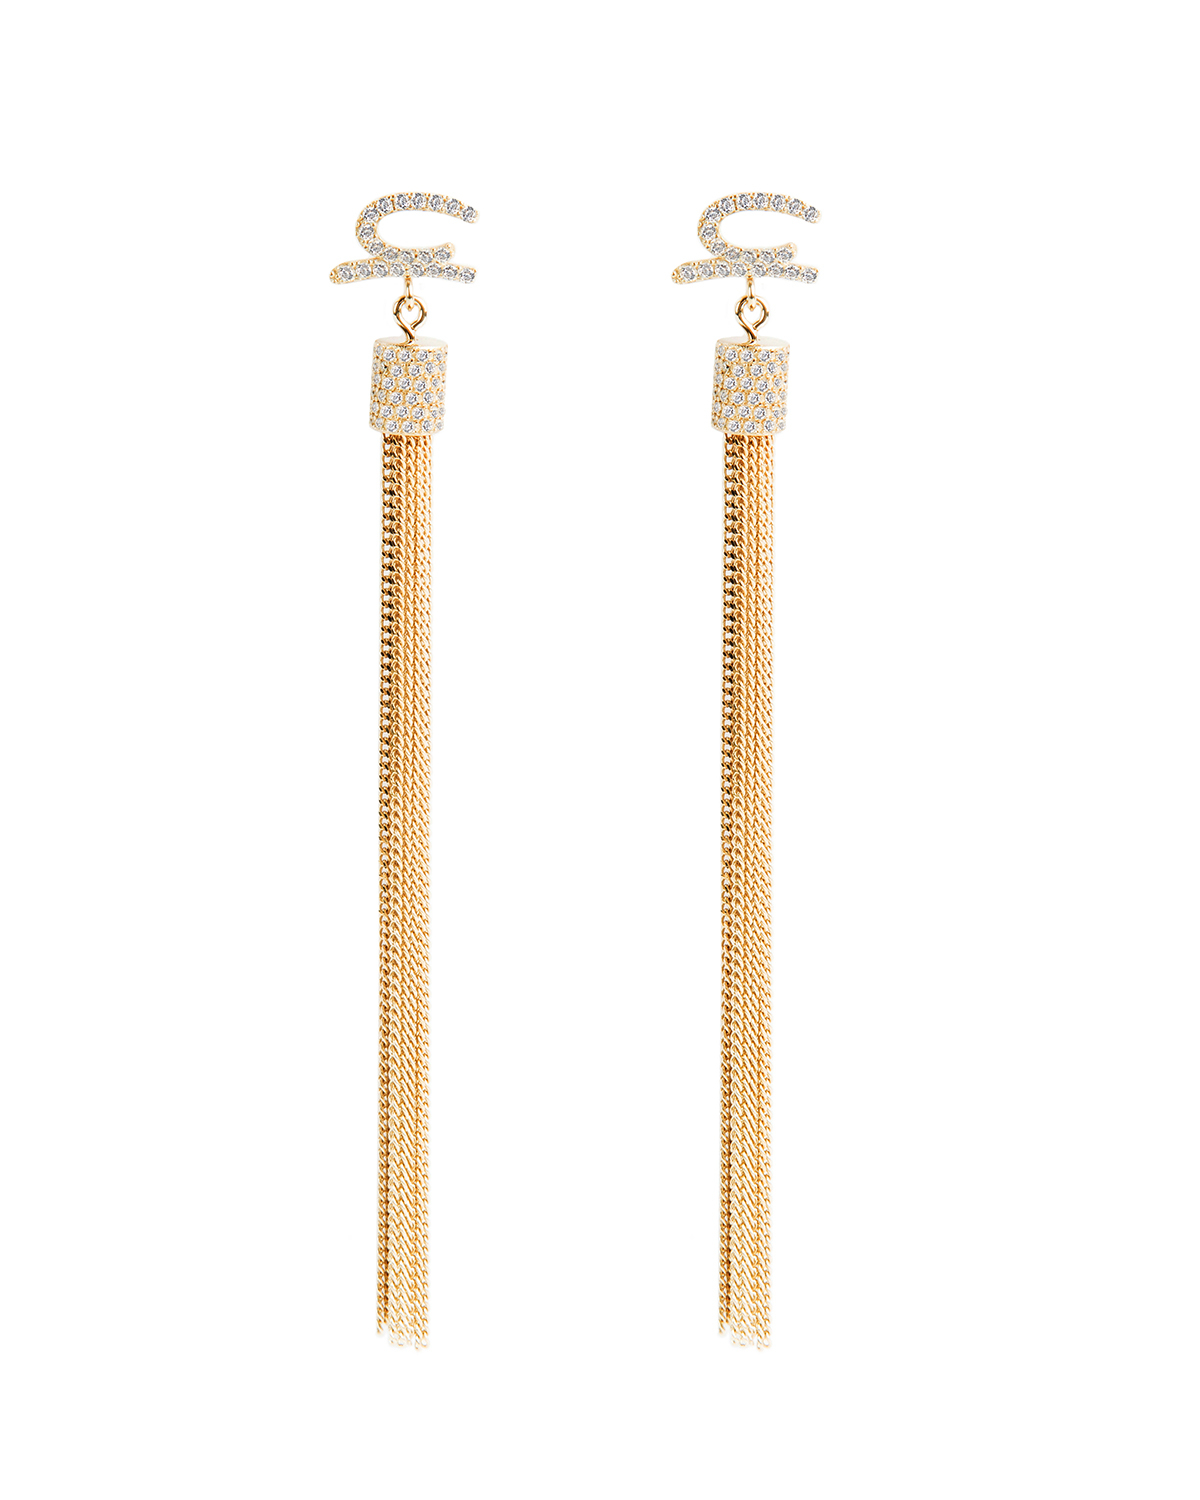 Crystal embellished gold-plated earrings | Accessories, Jewelry, Gifts, Accessories, Cruise 2023 Collection, Valentine's Day, Mother's Day | Genny